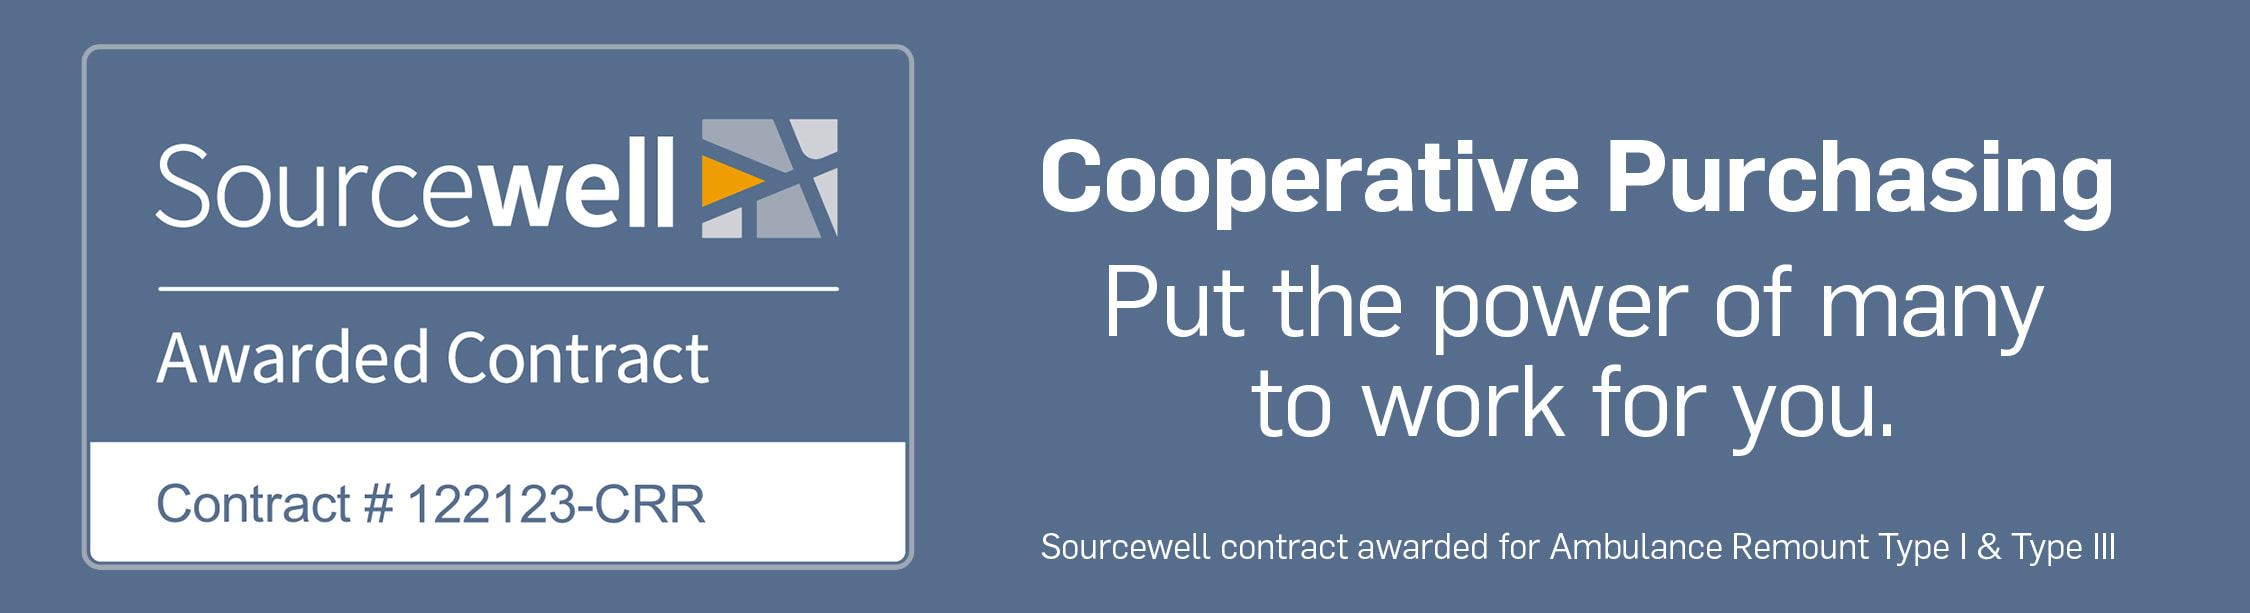 Sourcewell Cooperative Purchasing Contract Awarded to Crossroads Ambulance